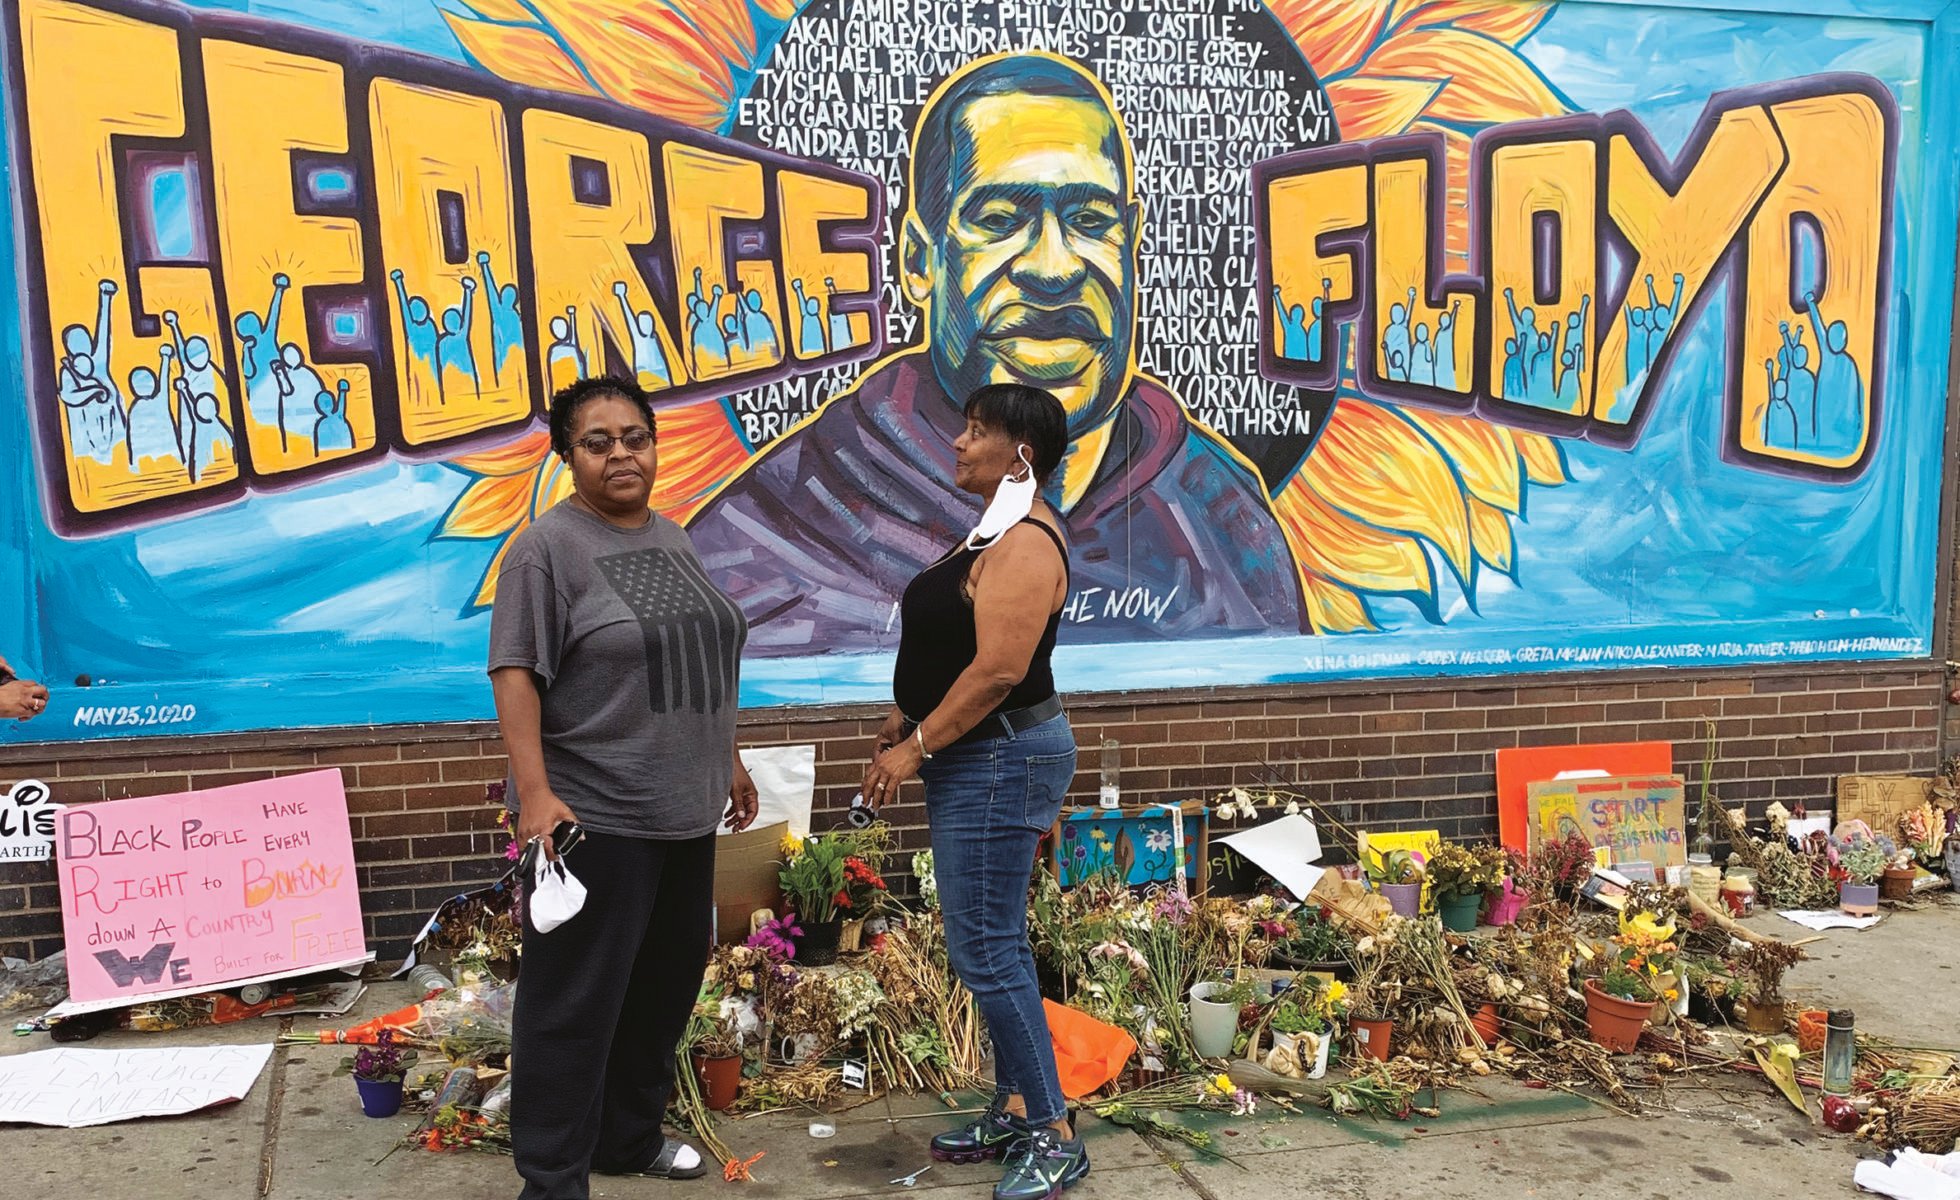 Demetria McFarland, left, and her sister drove through the night to visit a memorial for George Floyd in Minneapolis.